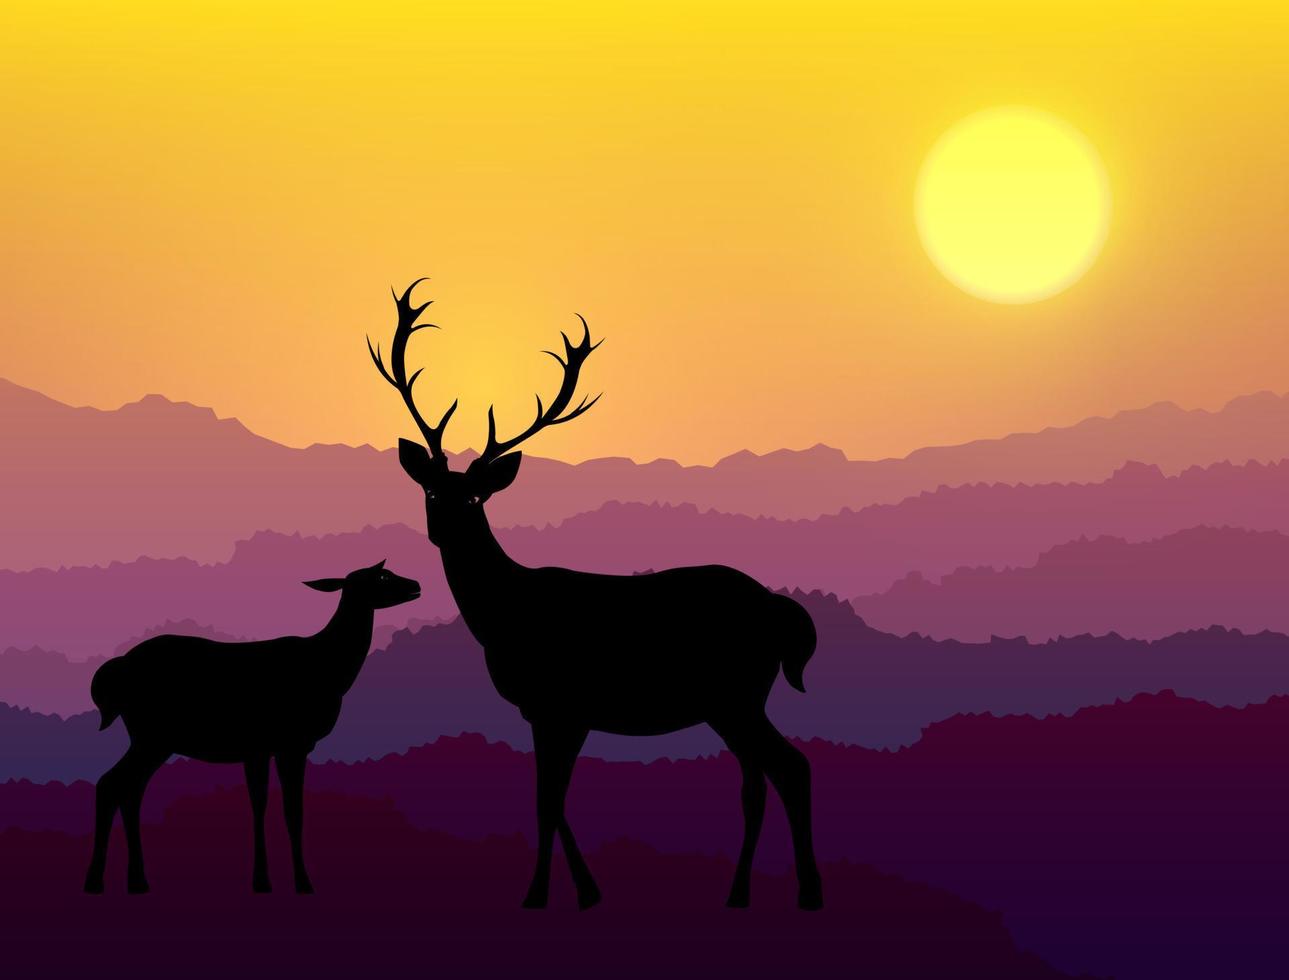 Deer silhouette standing on a hill.Night full moon on the background. Animal silhouette, paper art vector